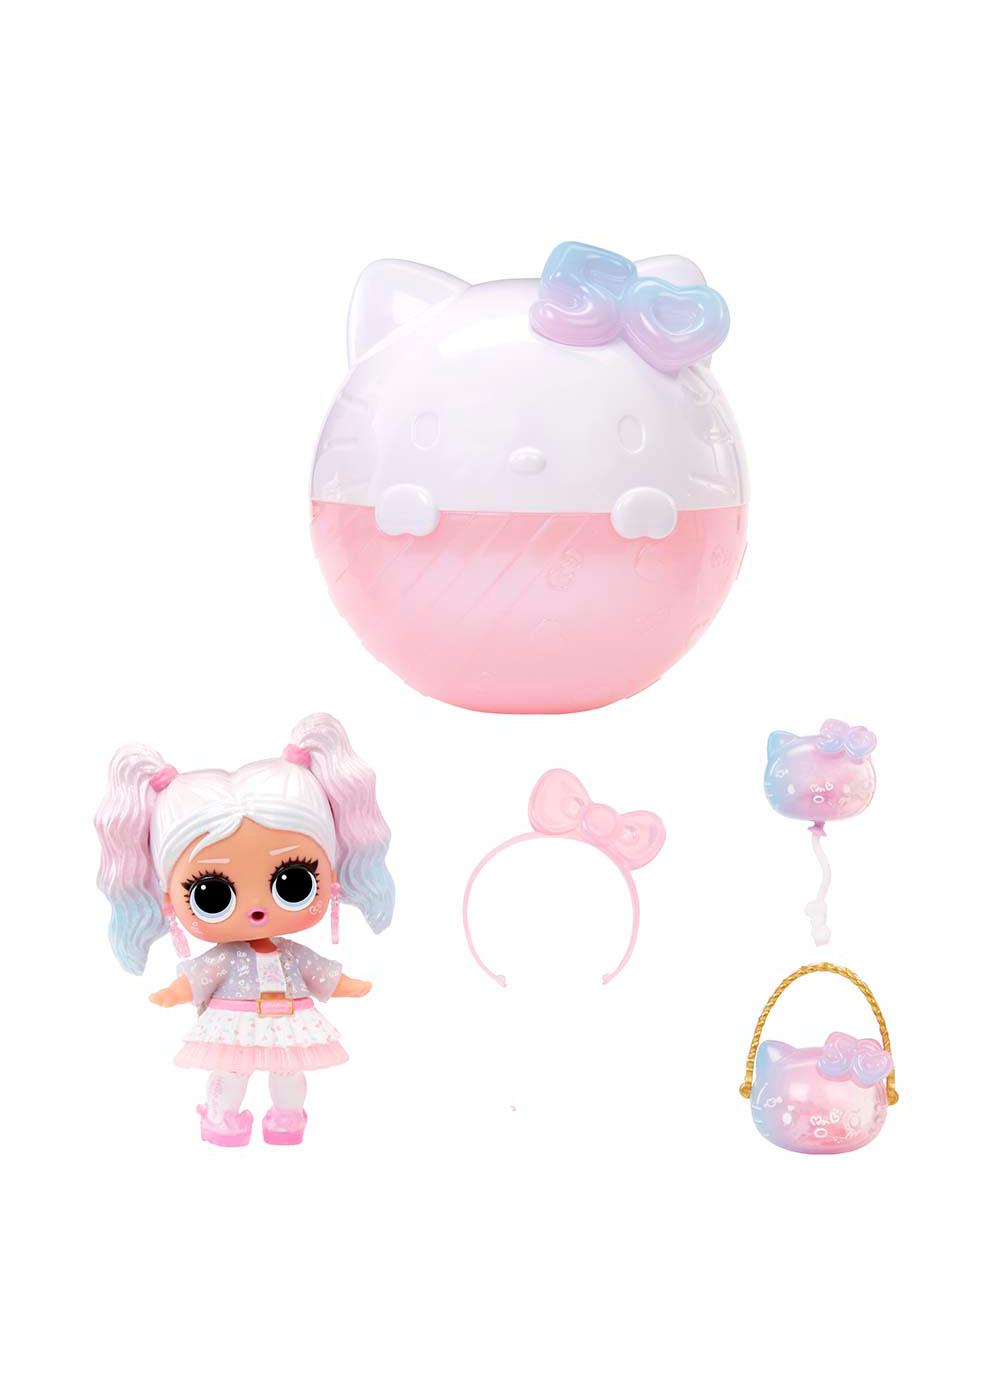 L.O.L. Surprise! Loves Hello Kitty Tots 50th Anniversary Capsule; image 4 of 5